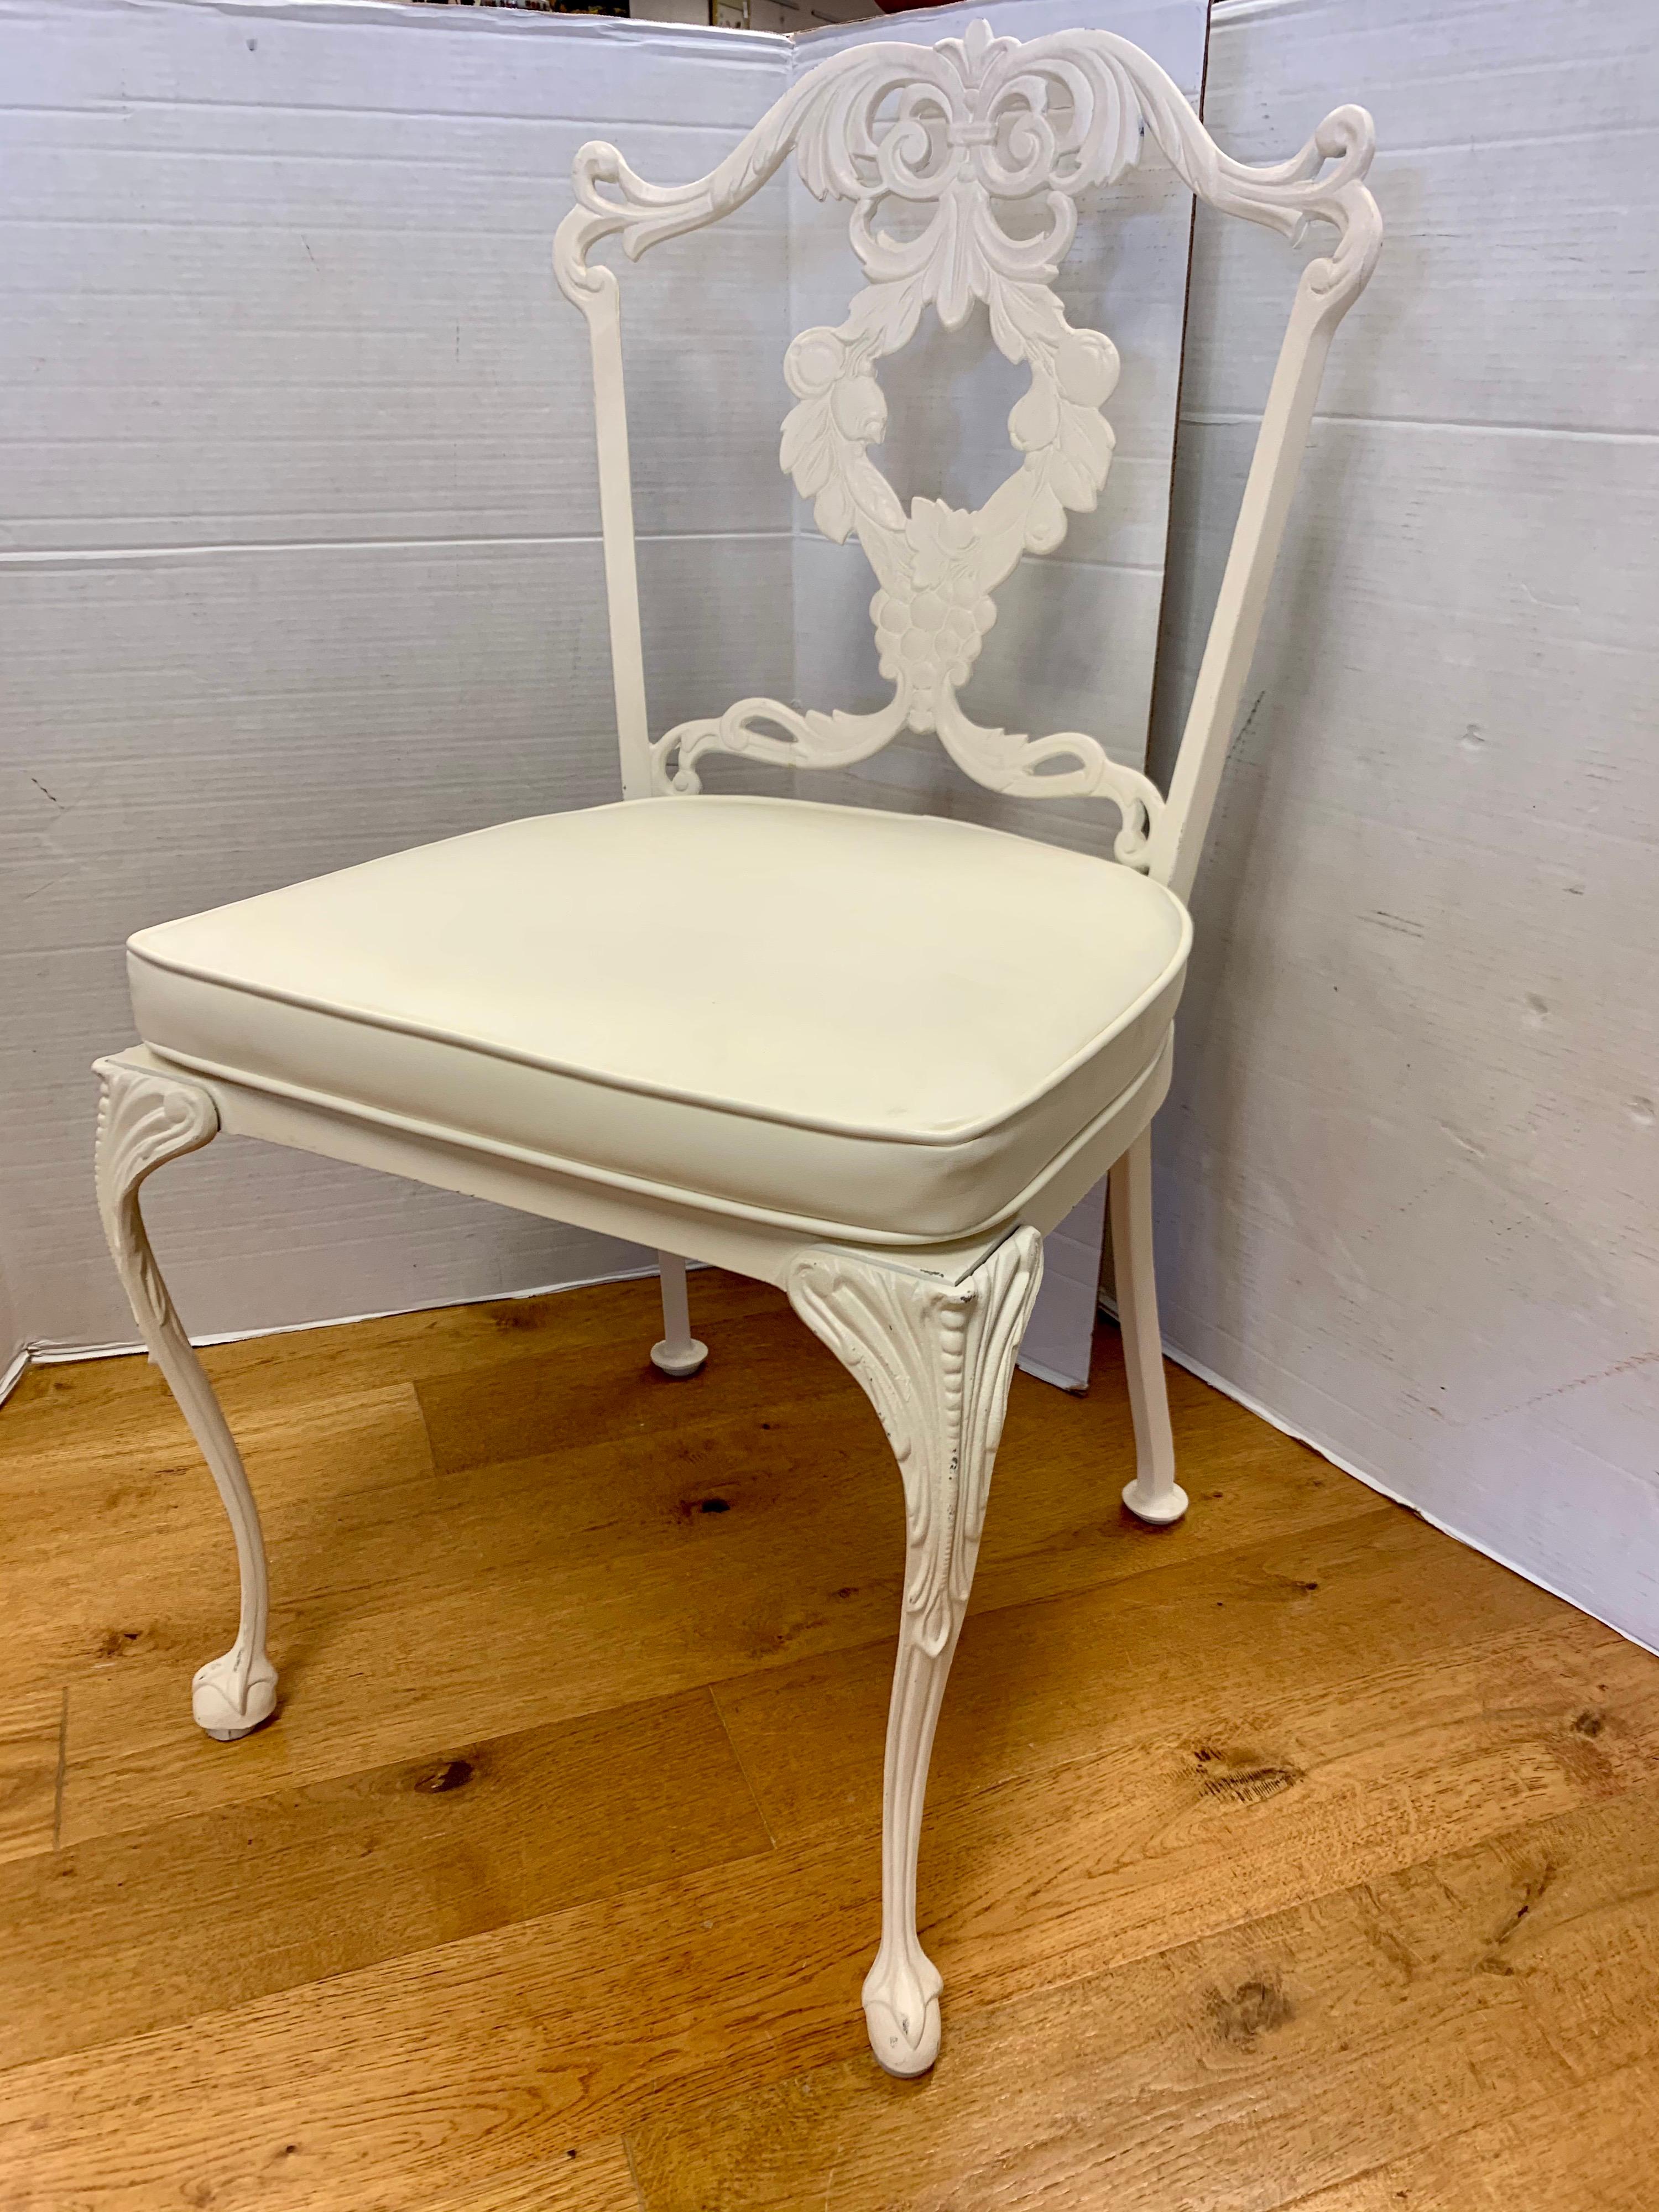 Pair of 2 cast aluminum and white enameled French regency style dining chairs. Fresh white enamel over finely cast aluminum for which Molla was renowned. Ultra rare. Also not we will have the matching table available exclusively on 1stDibs this week